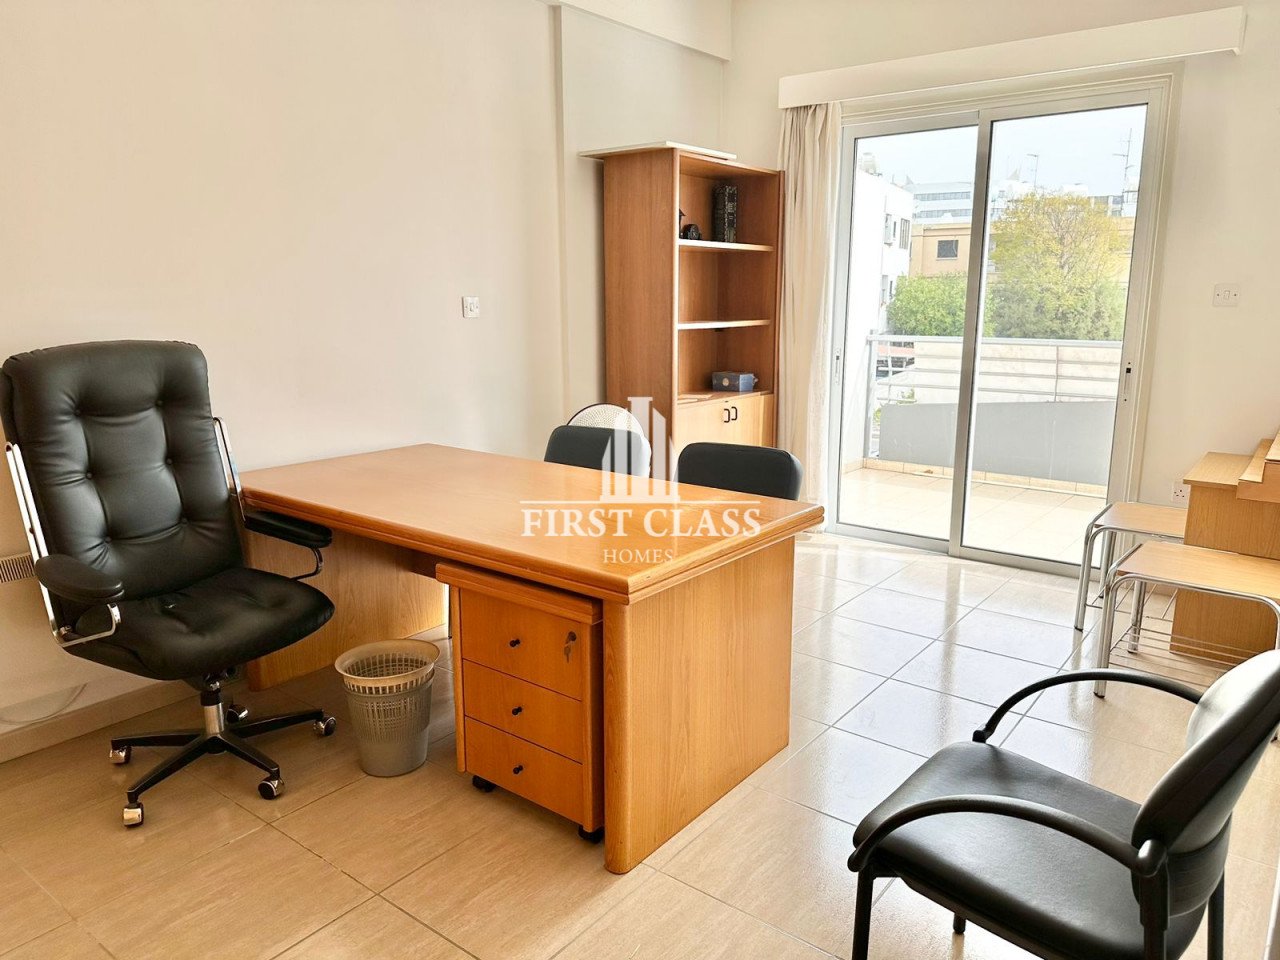 Property for Rent: Commercial (Office) in Strovolos, Nicosia for Rent | Key Realtor Cyprus